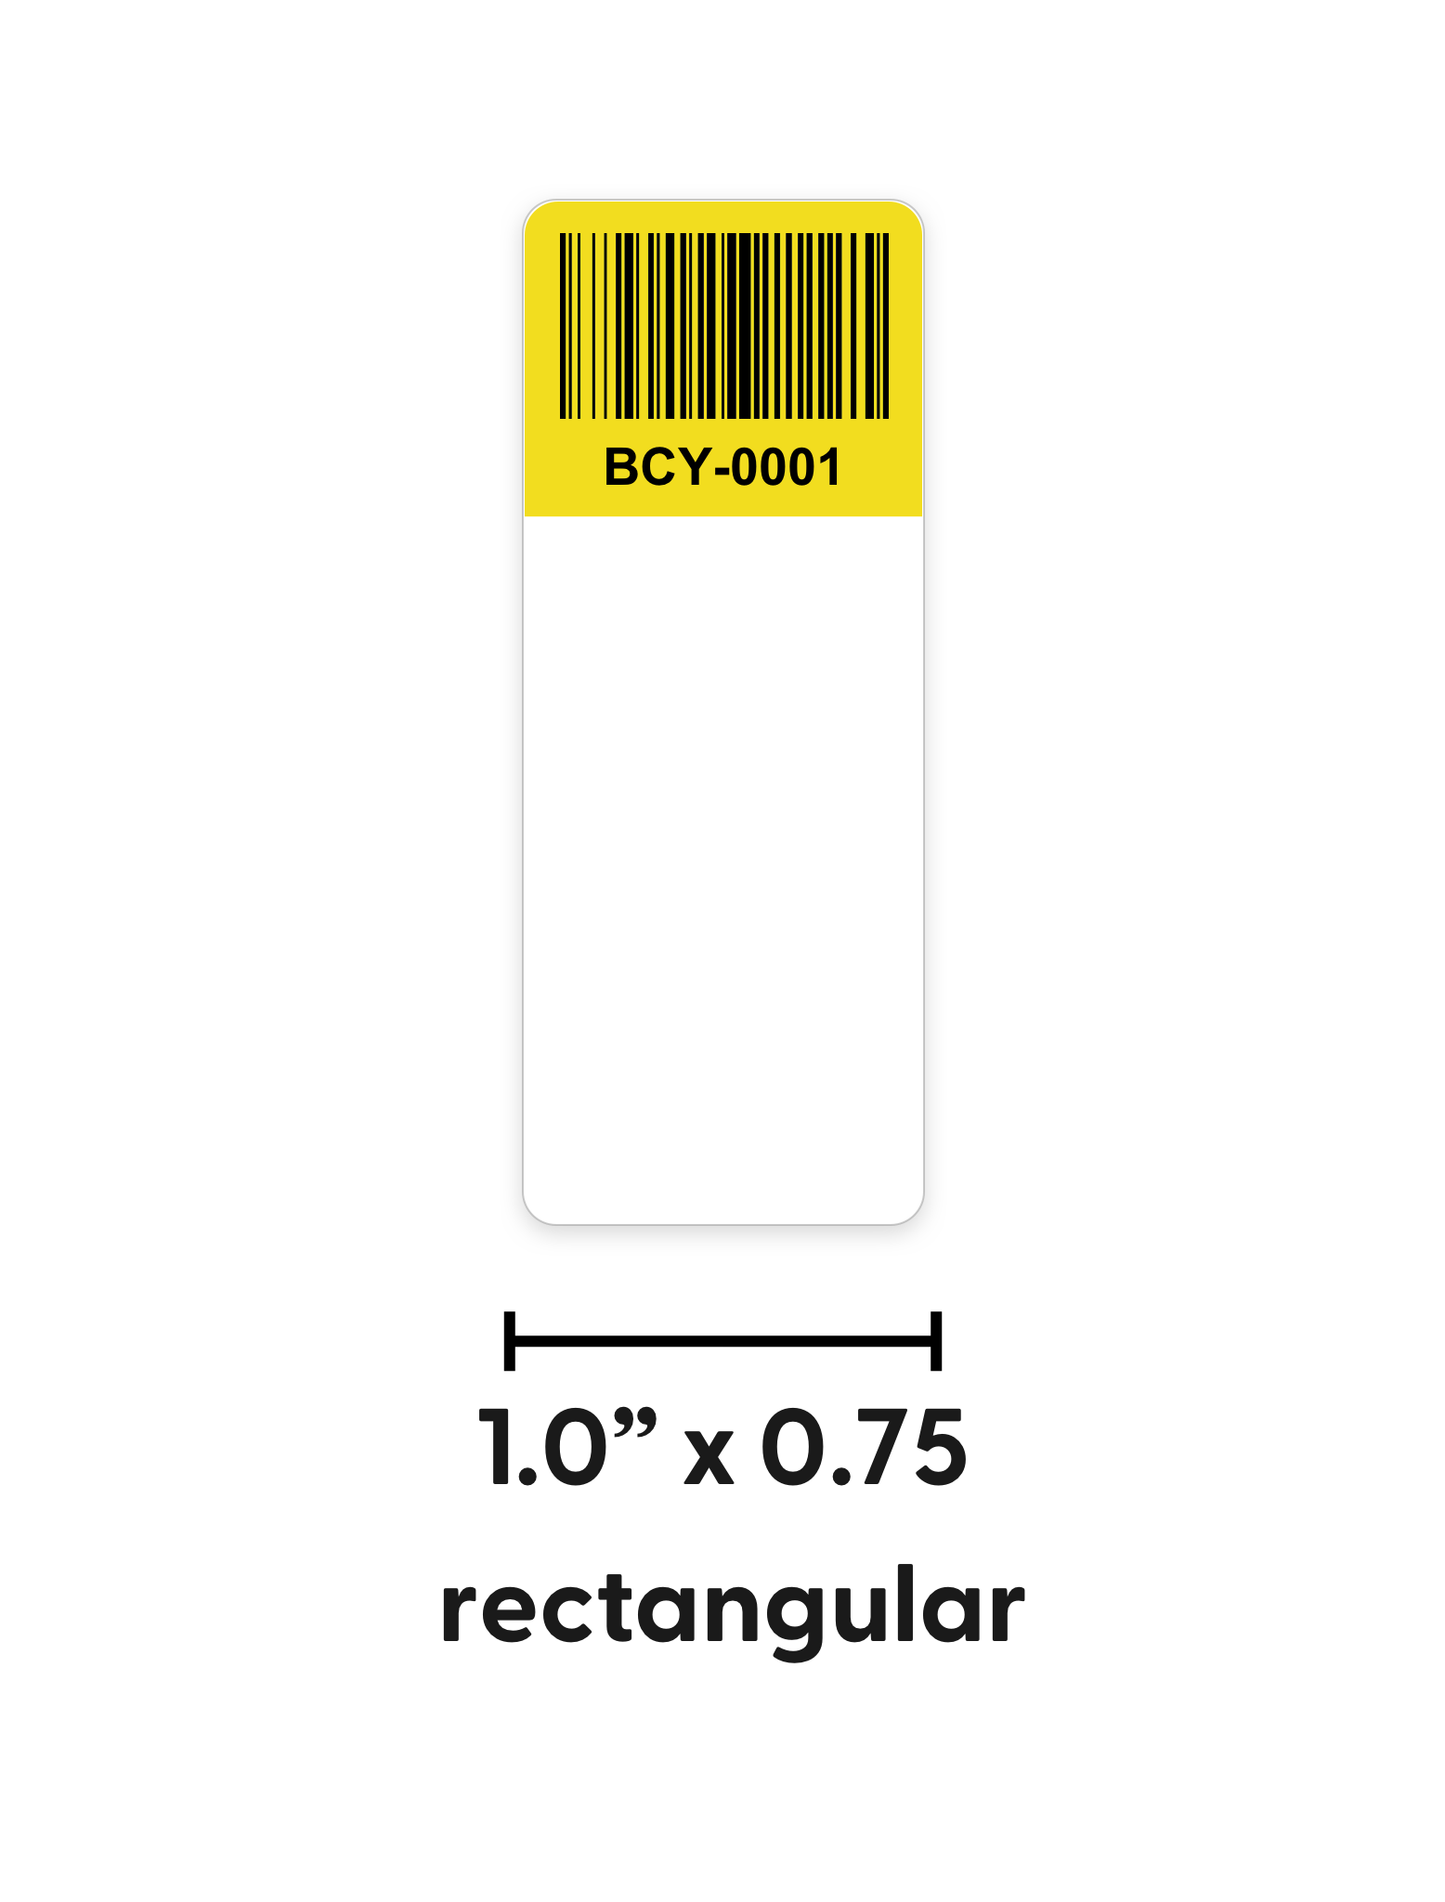 4 x 30 Cable Labels for bulk items